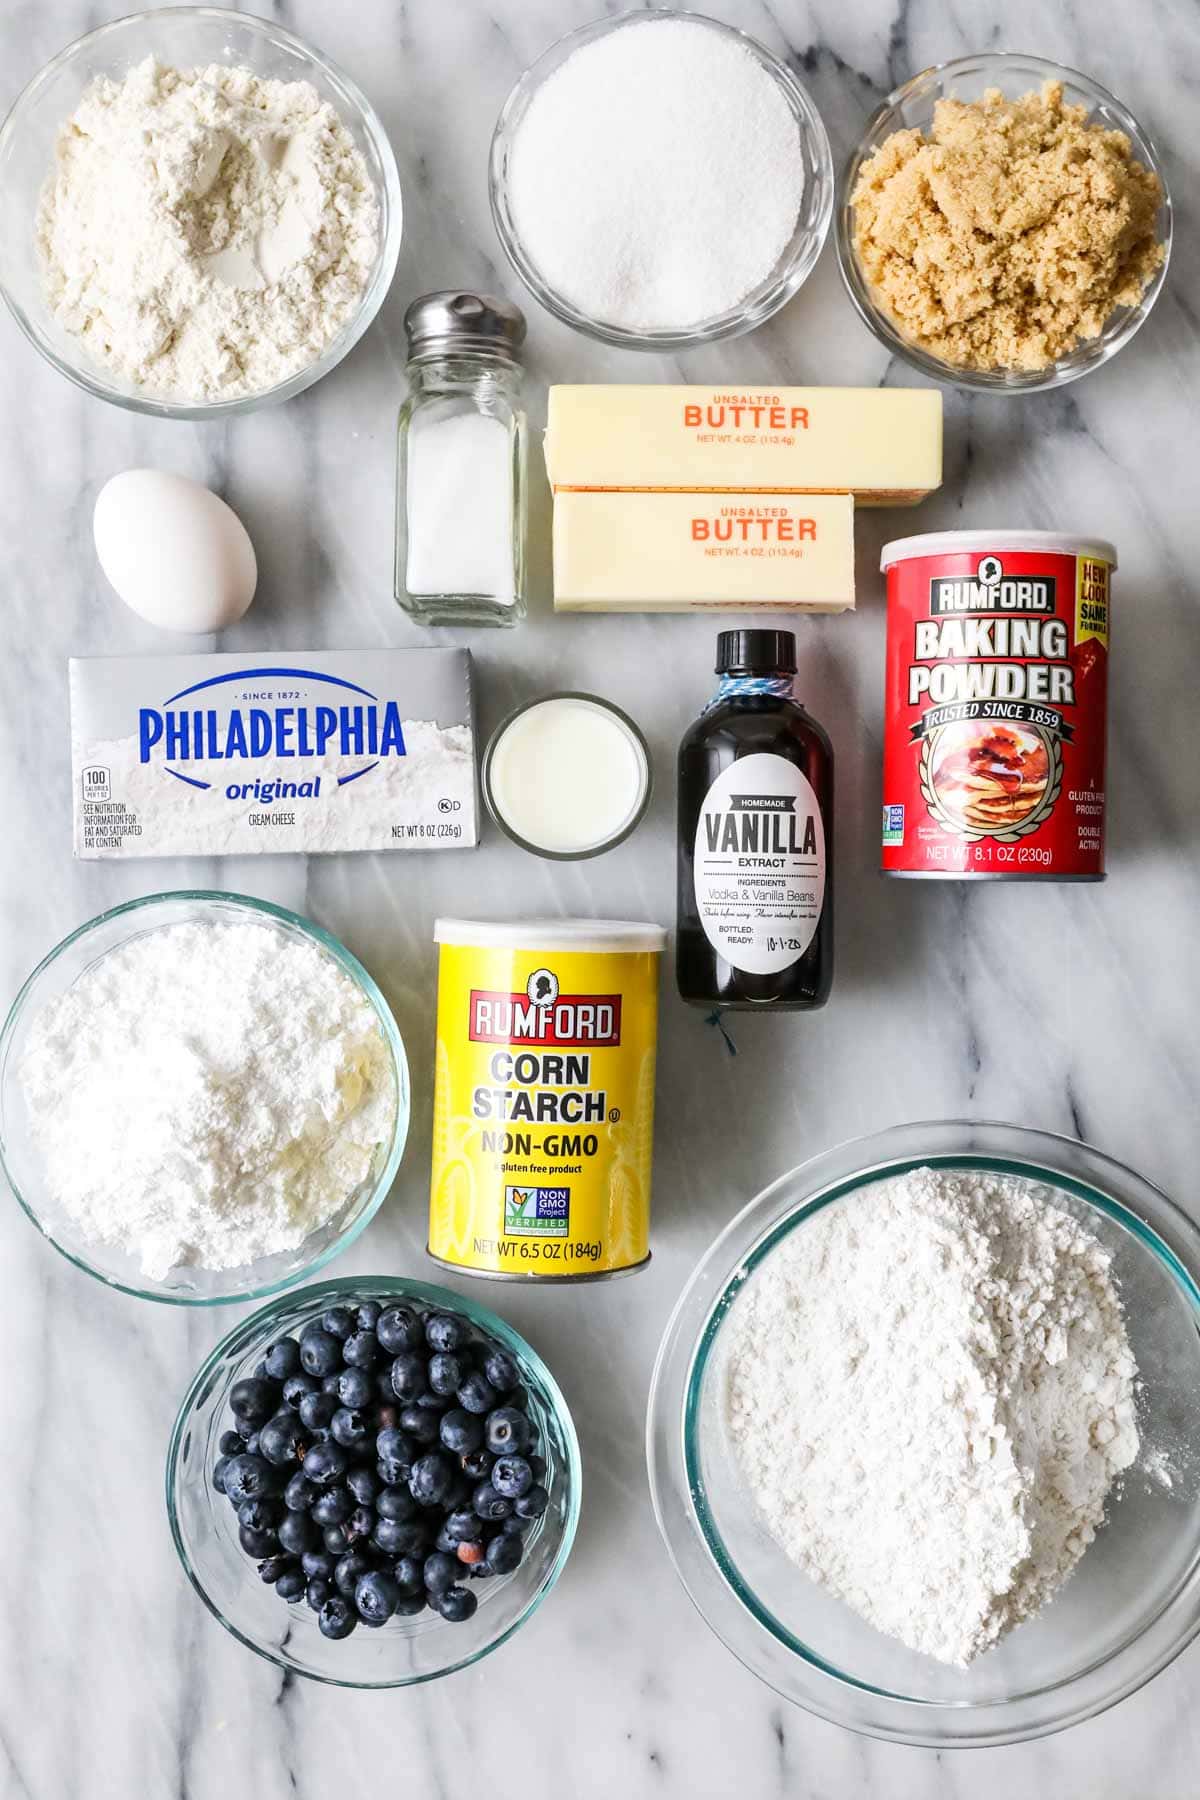 Overhead view of ingredients including flour, sugar, cream cheese, and blueberries.